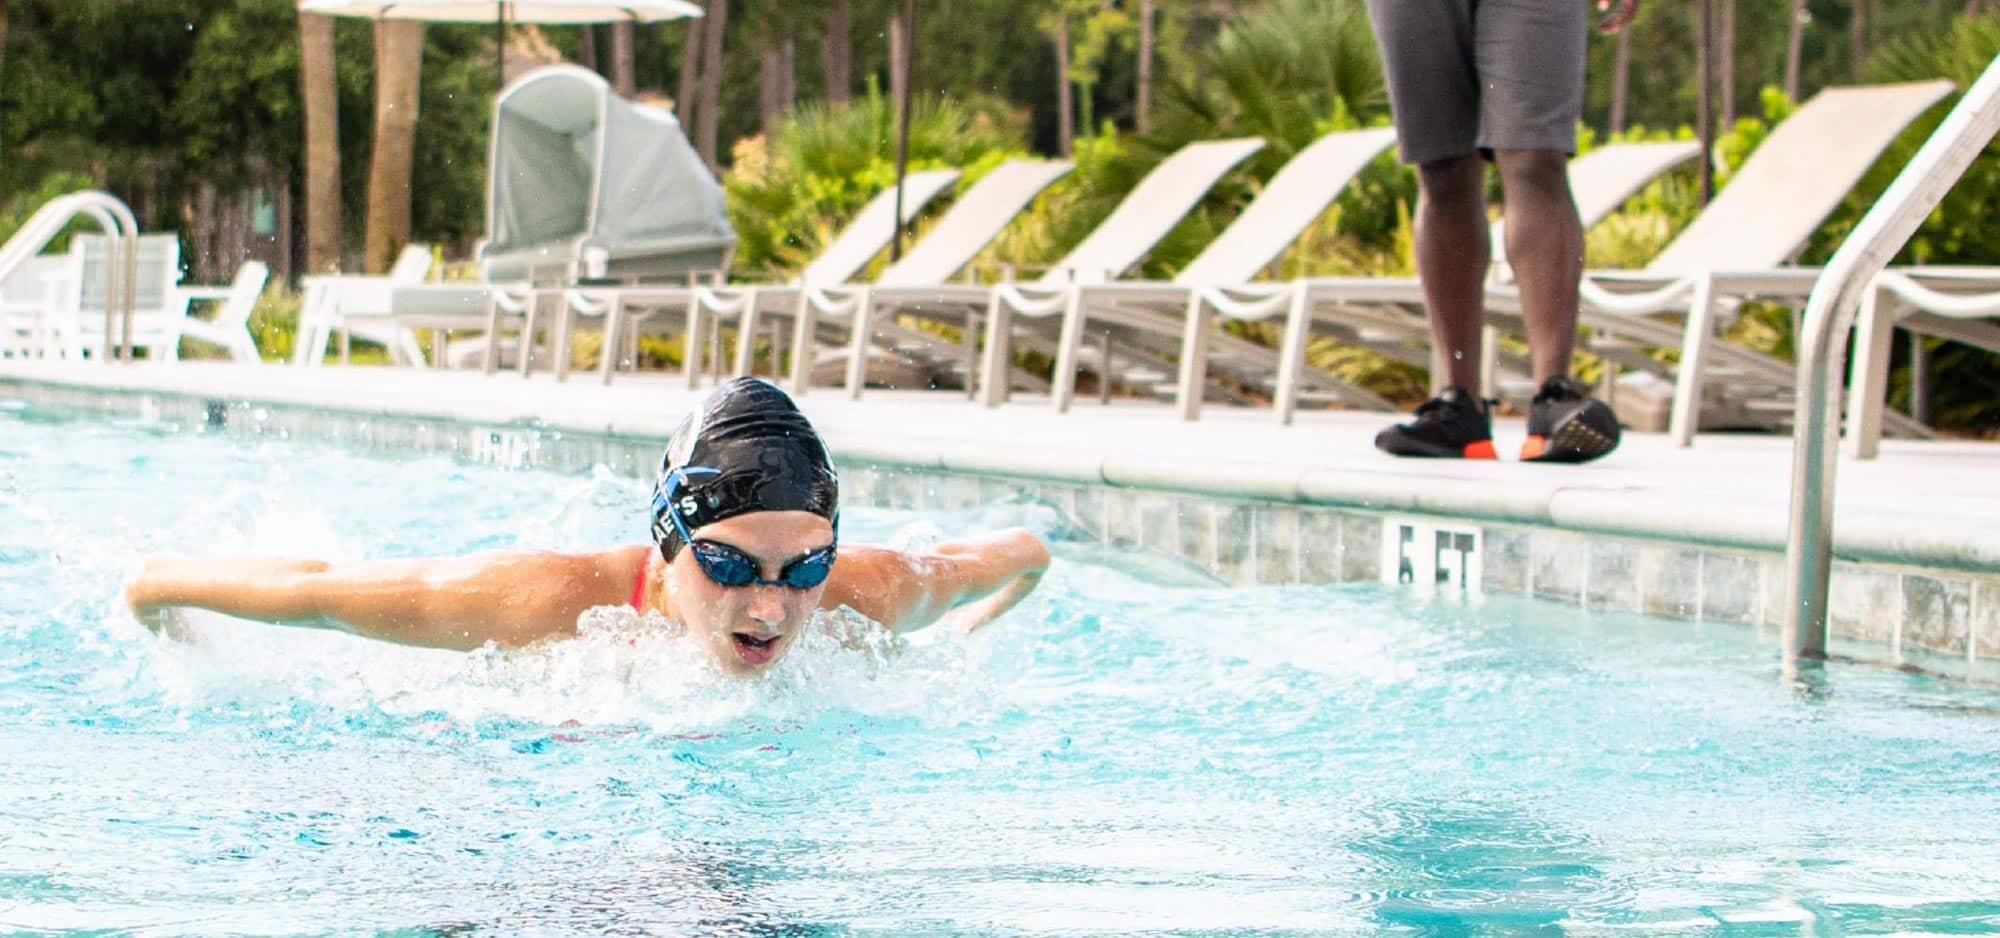 Swimmer wearing a swim cap and goggles does the butterfly stroke while doing laps in one of the five pools.